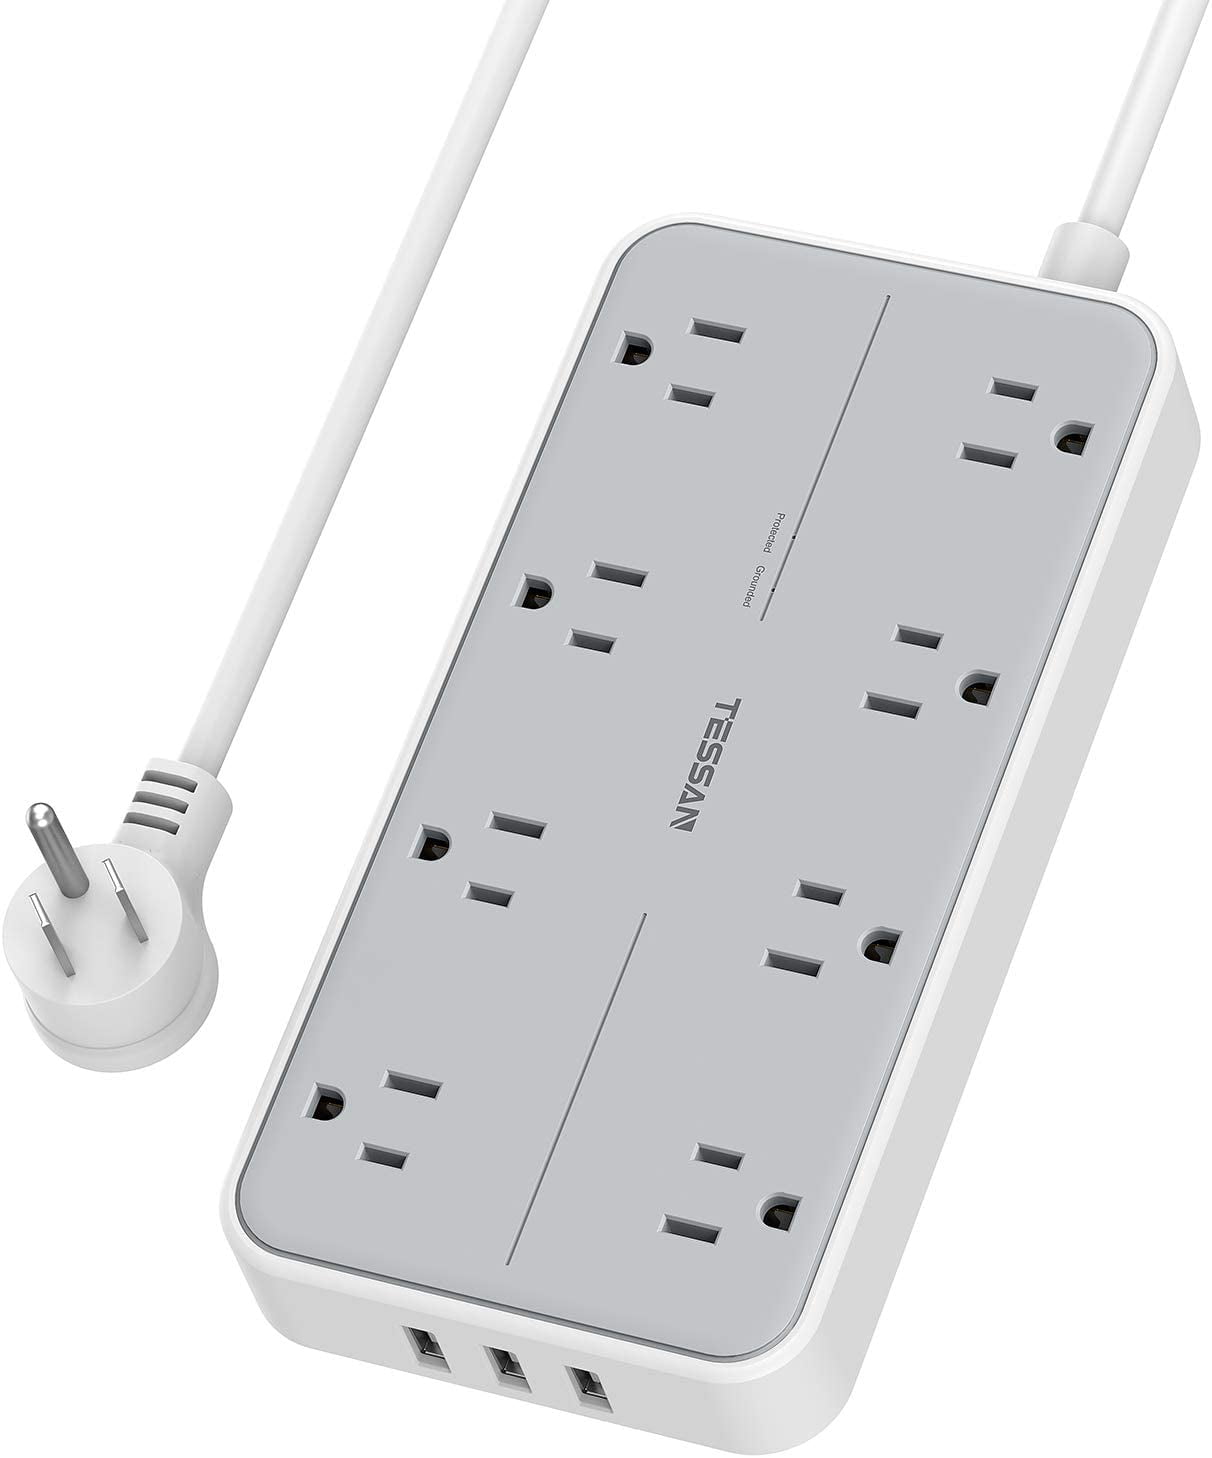 Surge Protector with USB Wall Mount Extension Cord for Home Office TESSAN Power Strip Flat Plug with 3 Charging Ports 1080 Joules